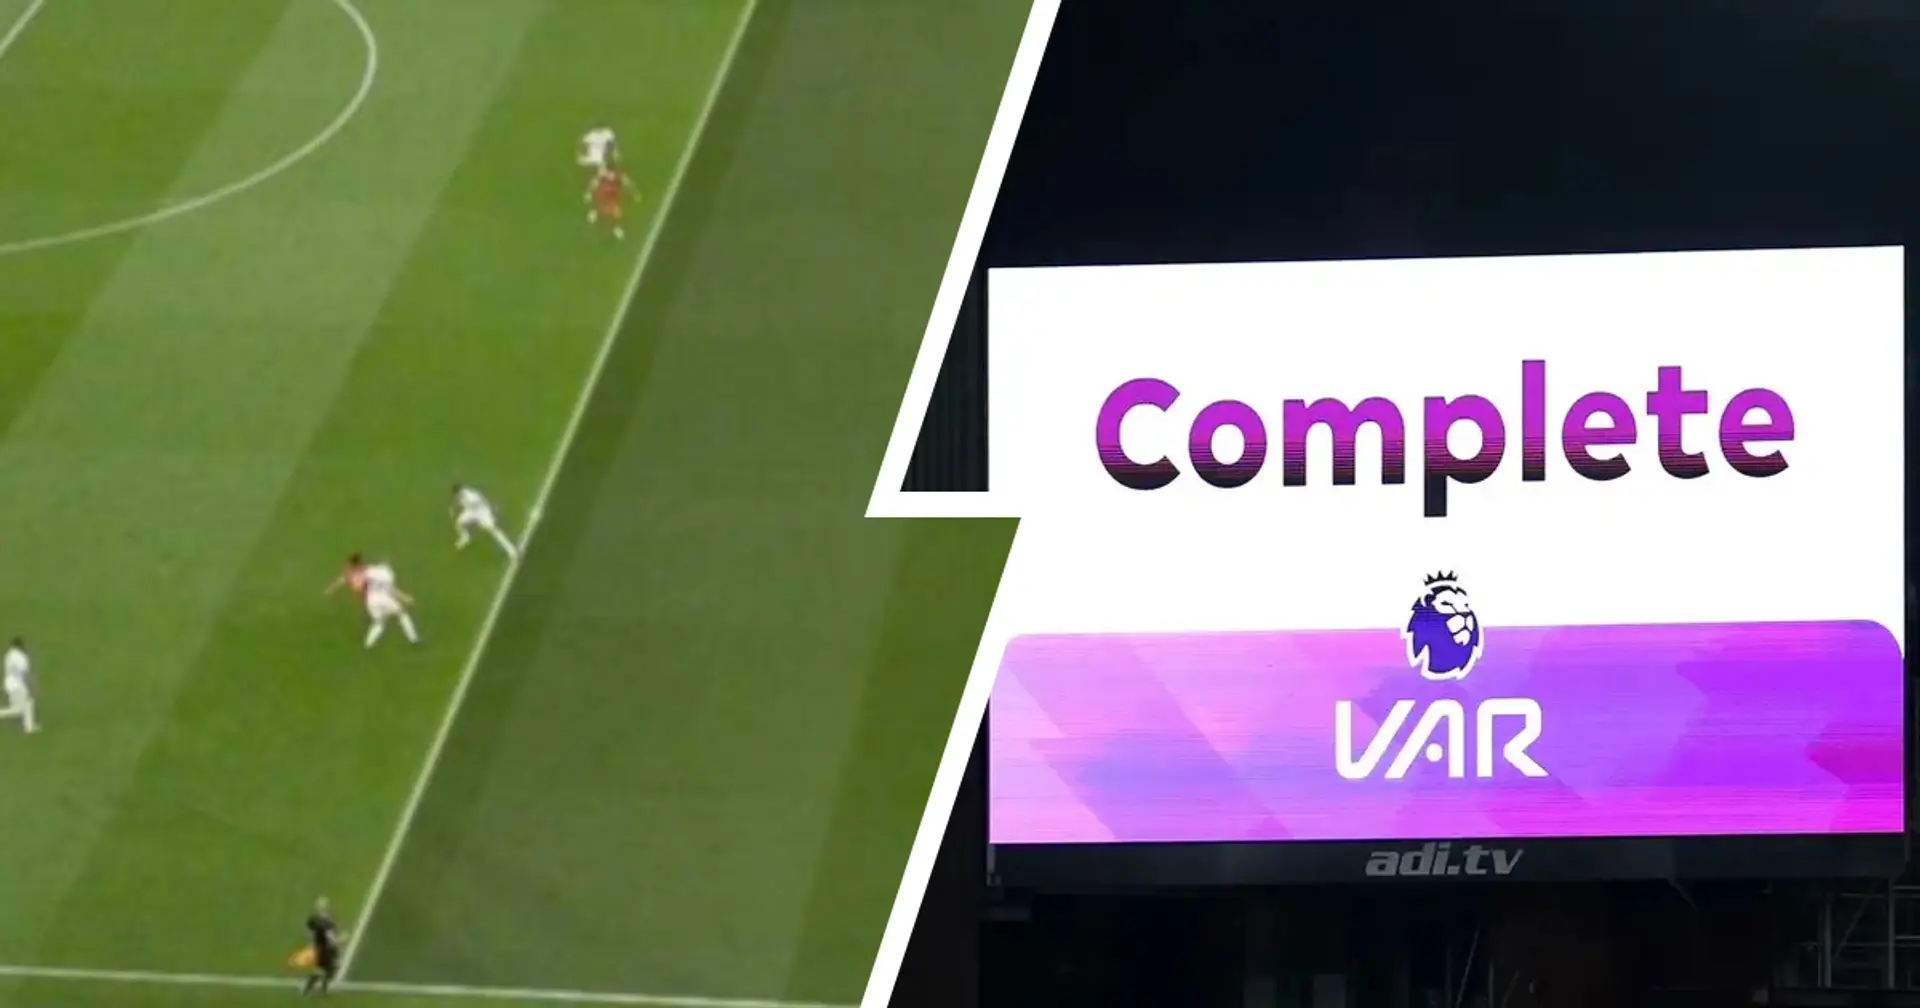 Liverpool to vote in favour of keeping VAR at upcoming Premier League vote